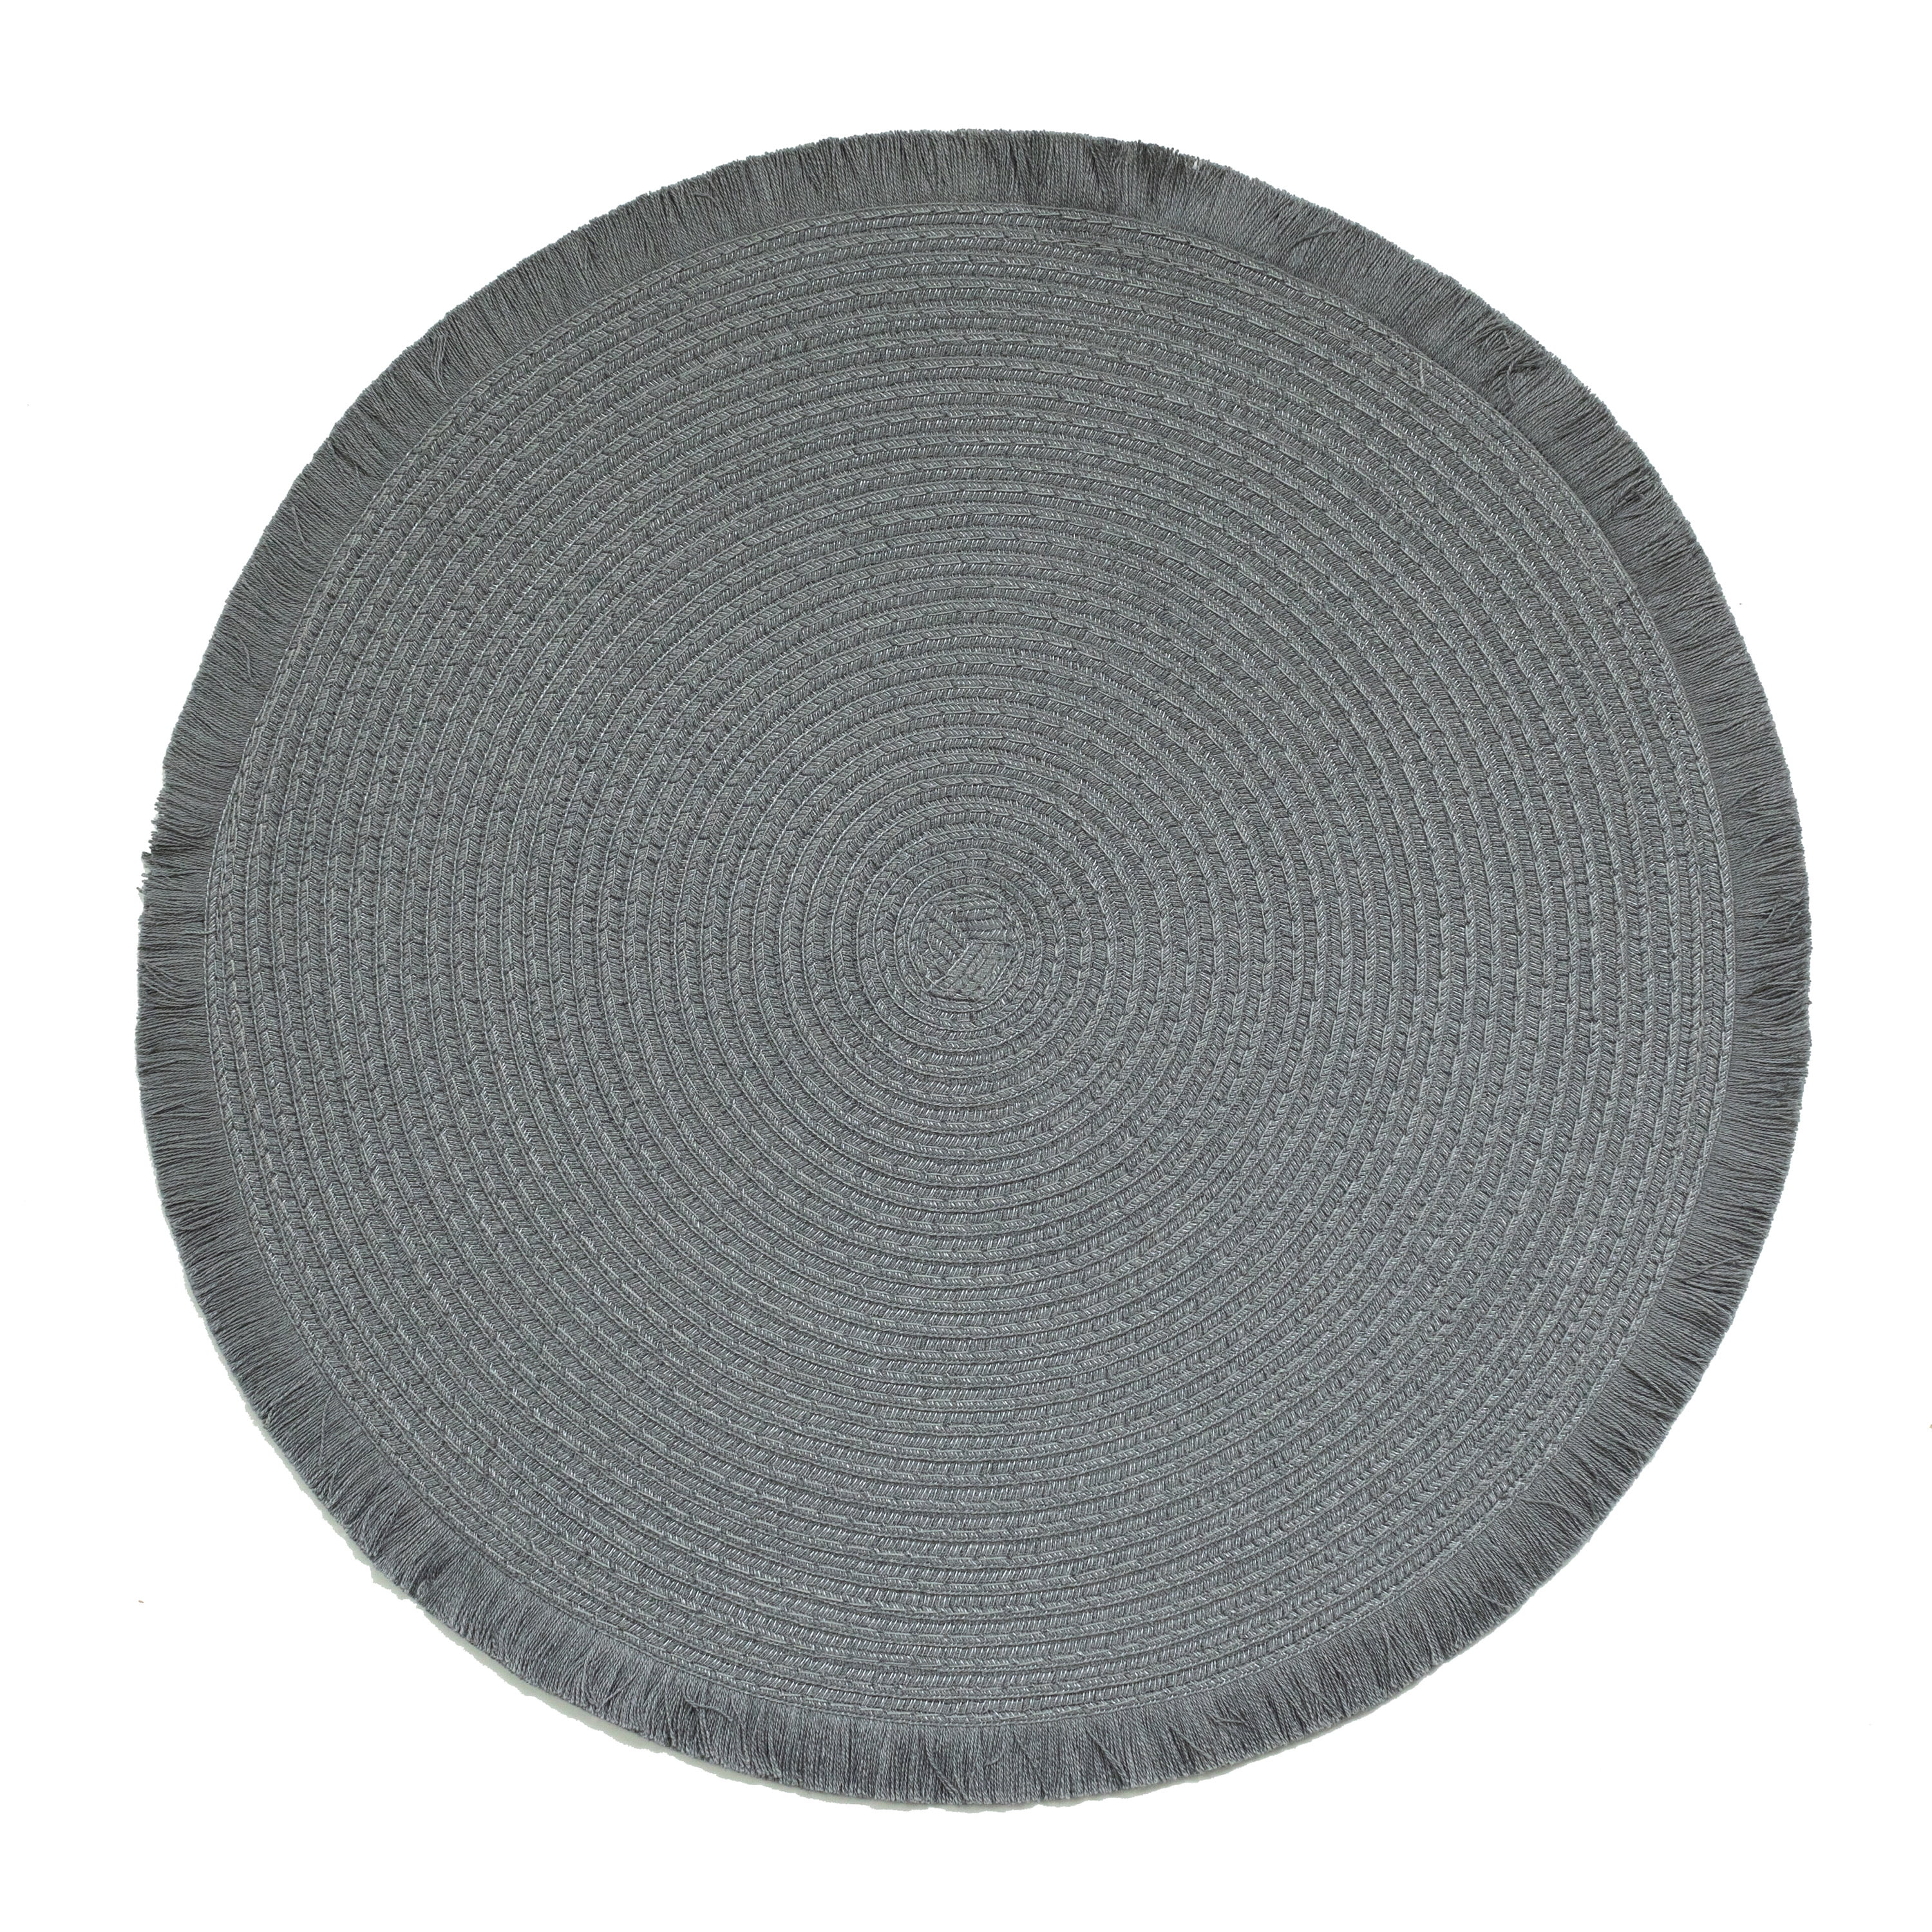 Mainstays Logan Fringe PP Round Placemat Grey Flannel 15 RD